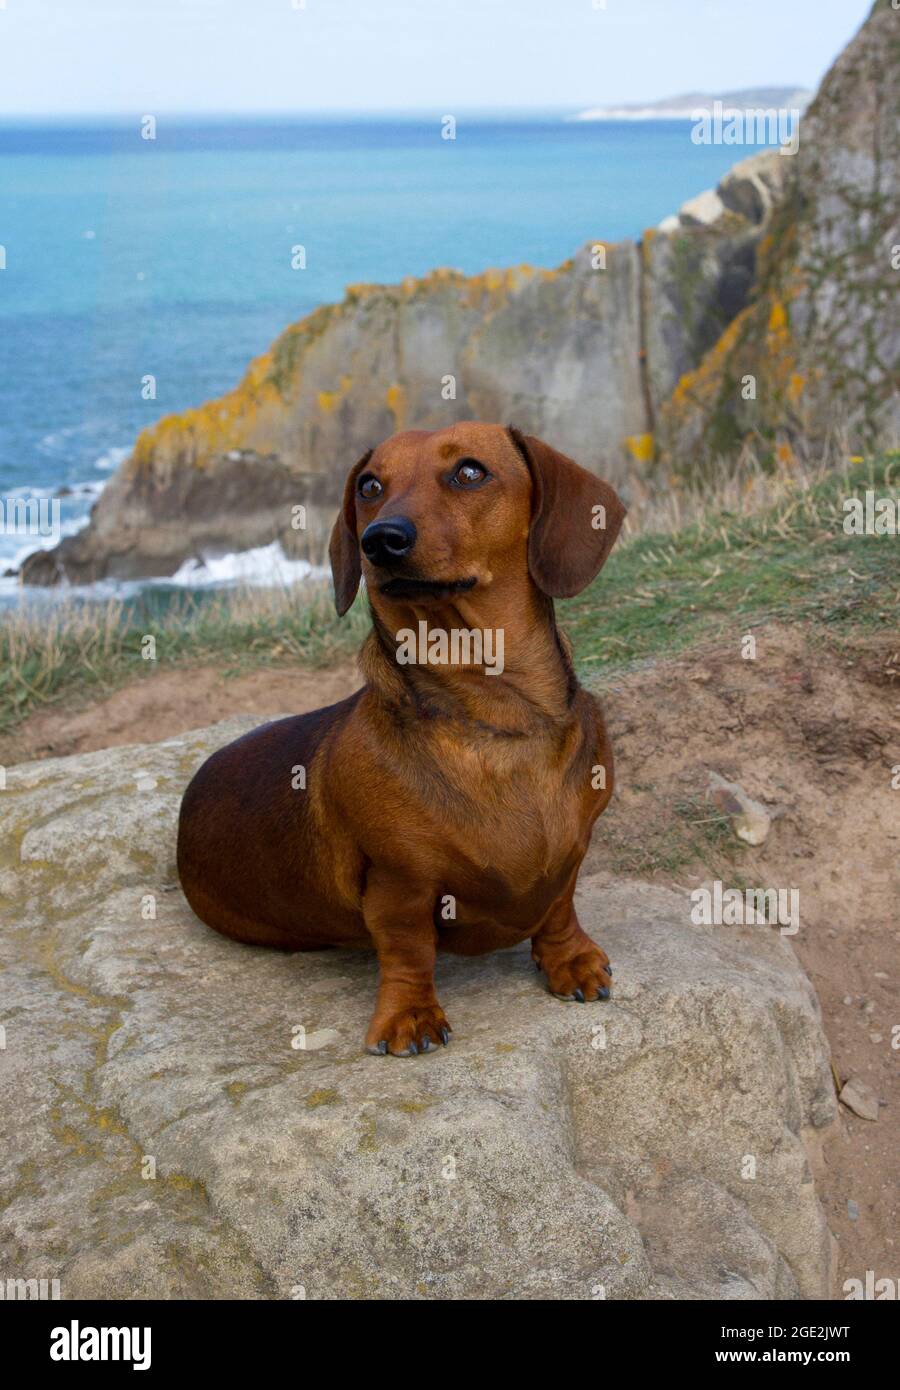 Dachshund called Dolly sitting on a rock with sea view Stock Photo